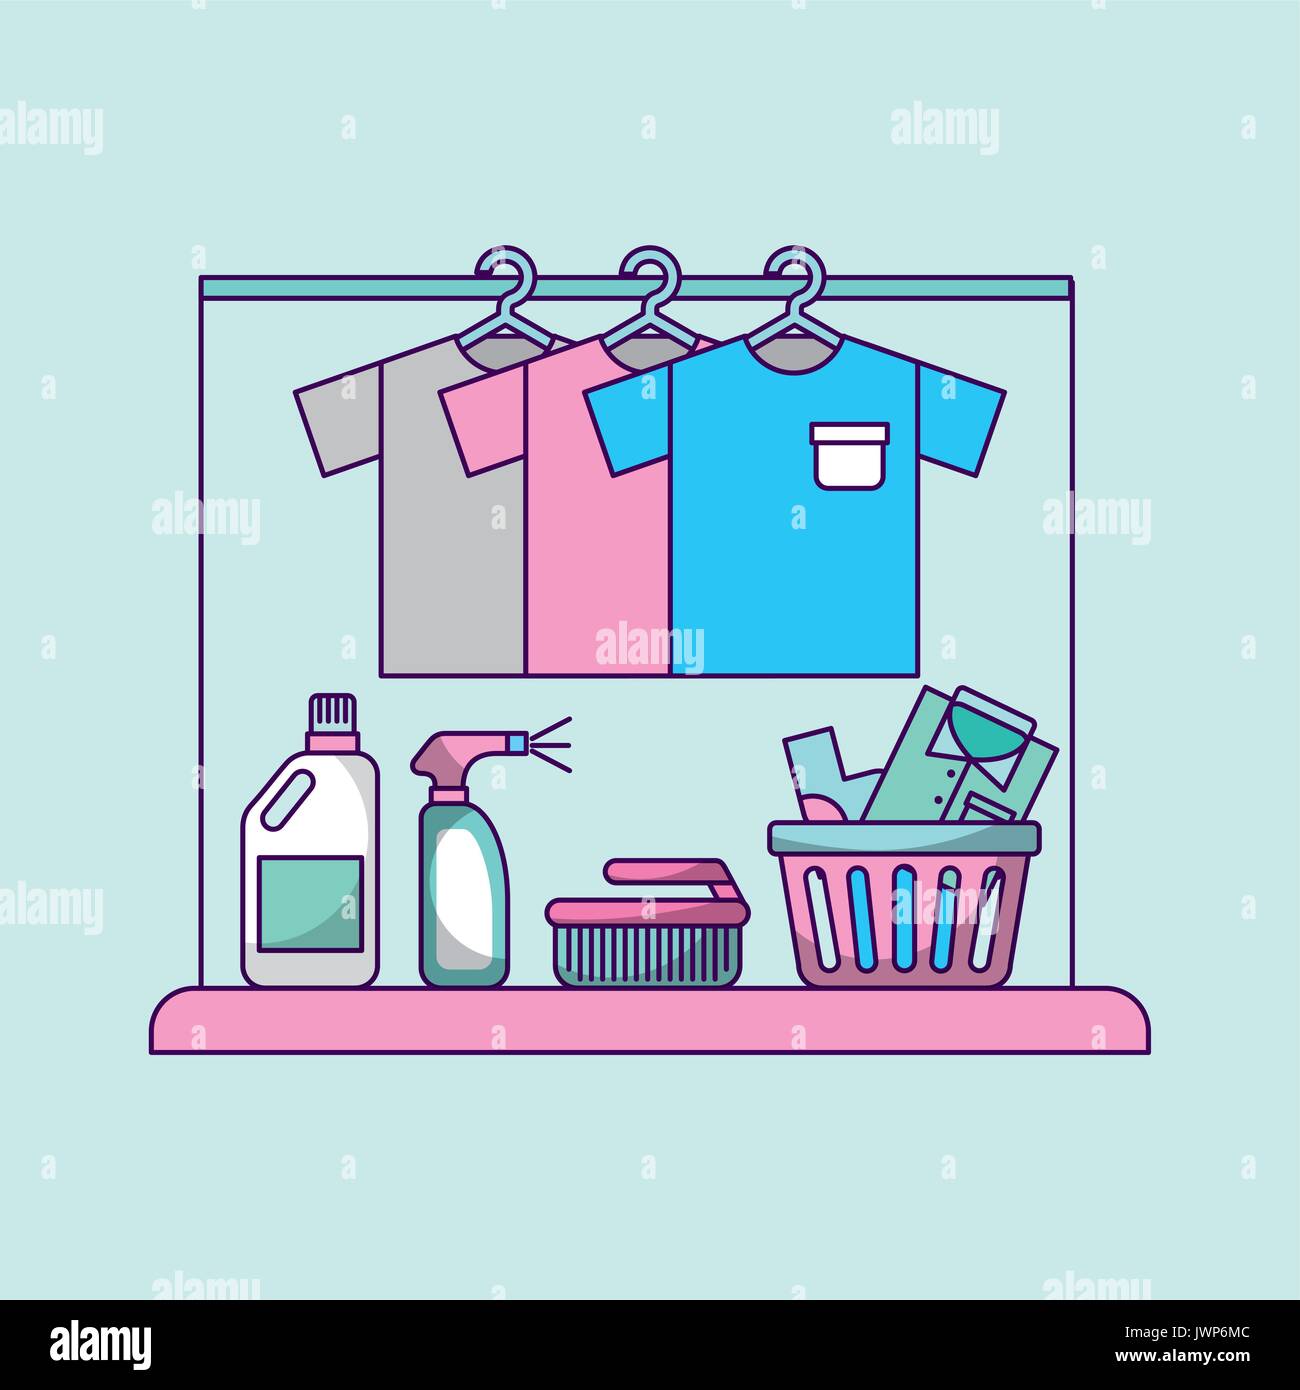 laundry-work-clothes-stock-vector-image-art-alamy